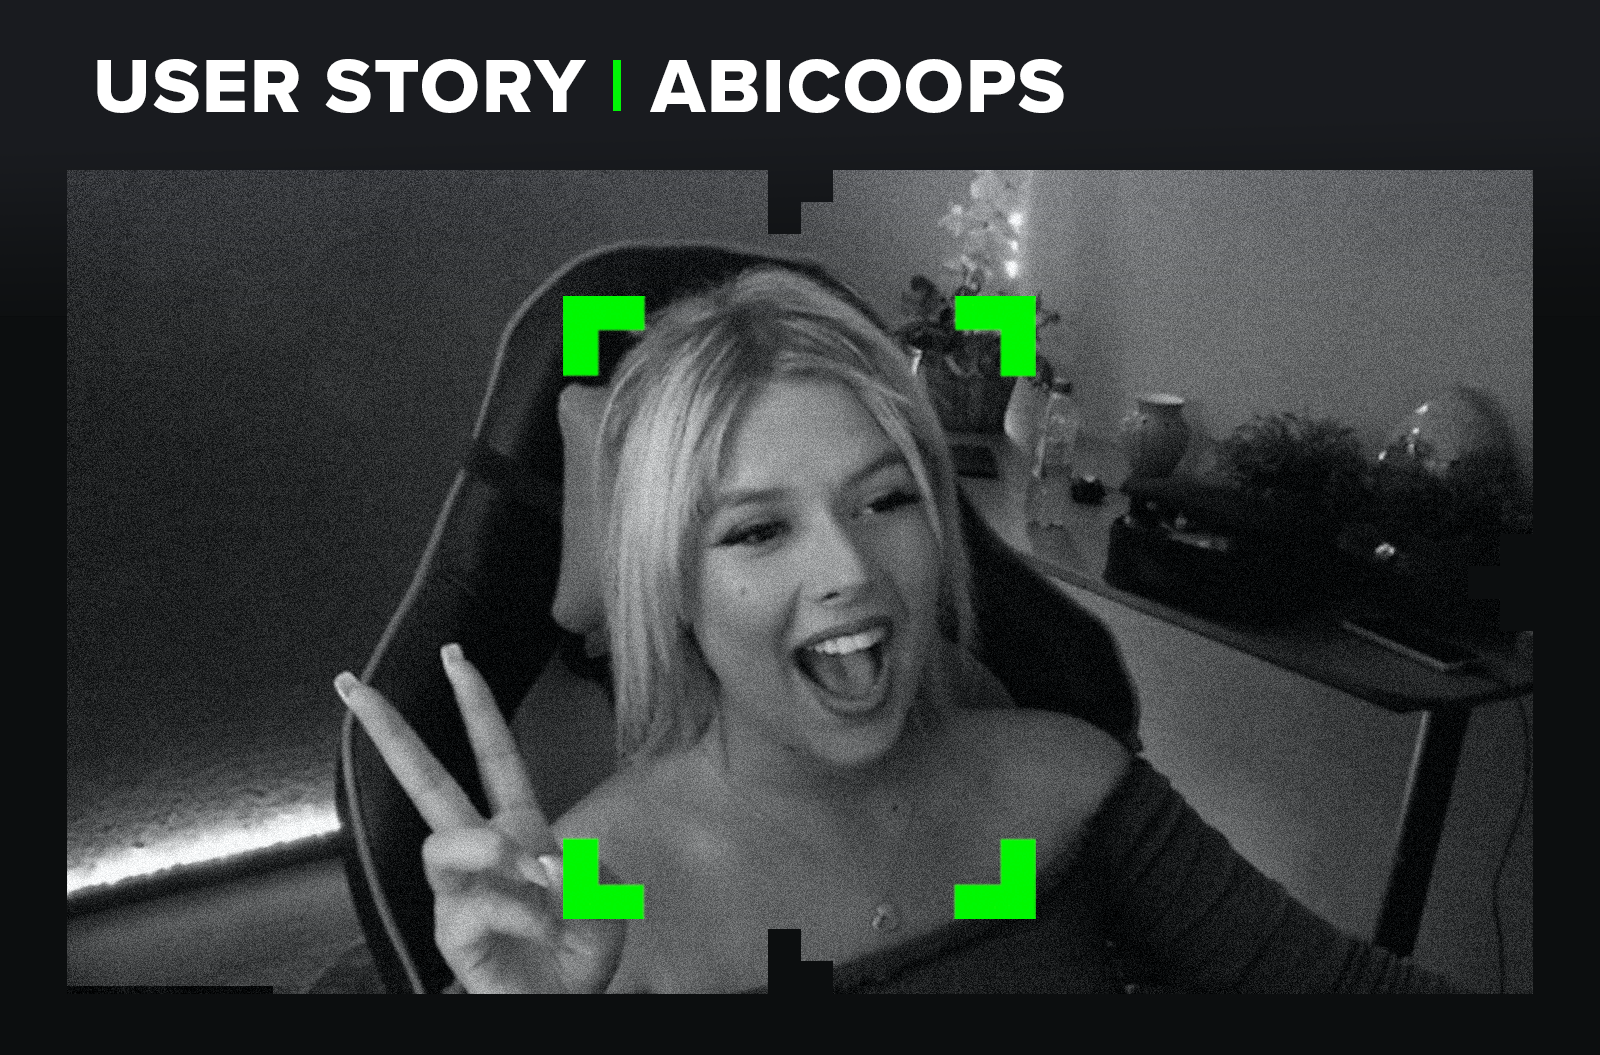 AbiCoops - User Story